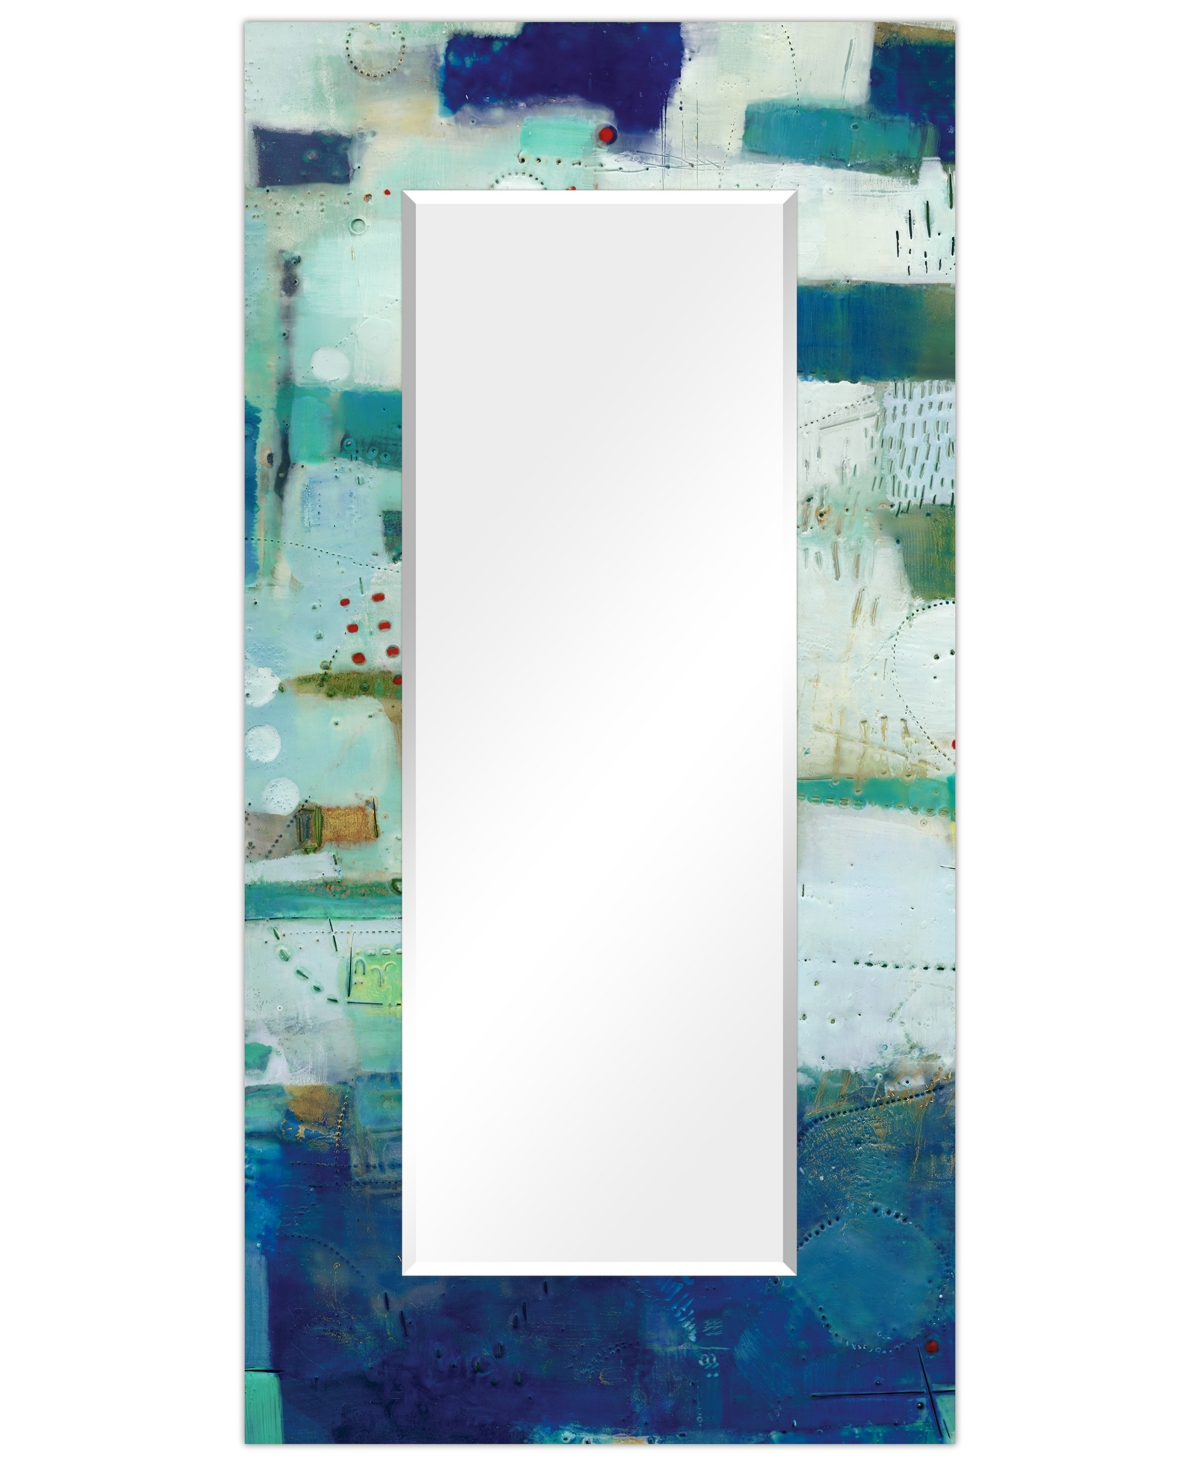 'Crore I' Rectangular On Free Floating Printed Tempered Art Glass Beveled Mirror, 72" x 36" - Multicolor